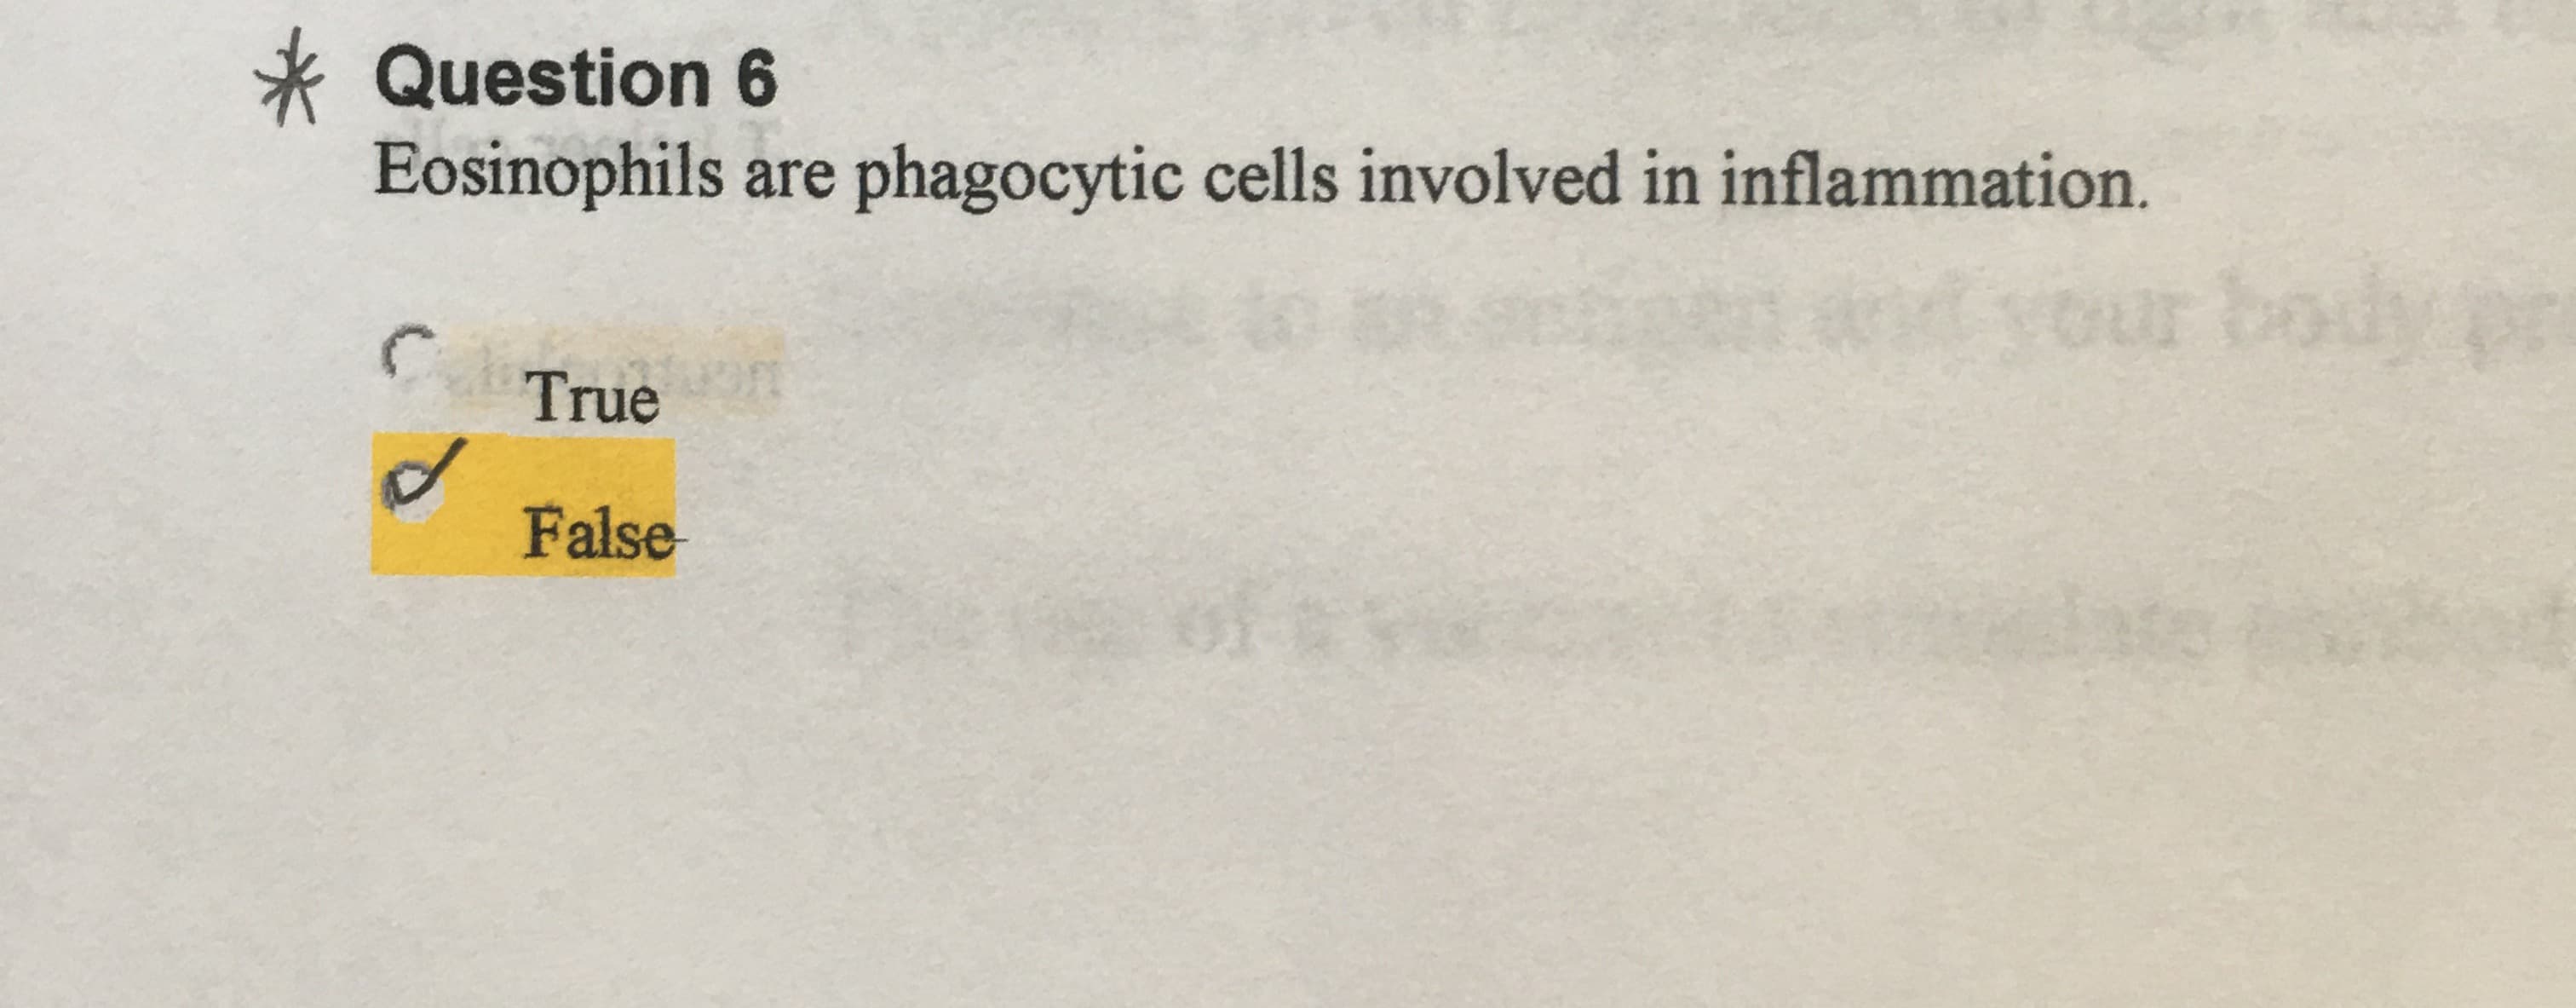 * Question 6
Eosinophils are phagocytic cells involved in inflammation.
Gur
C.
True
False
